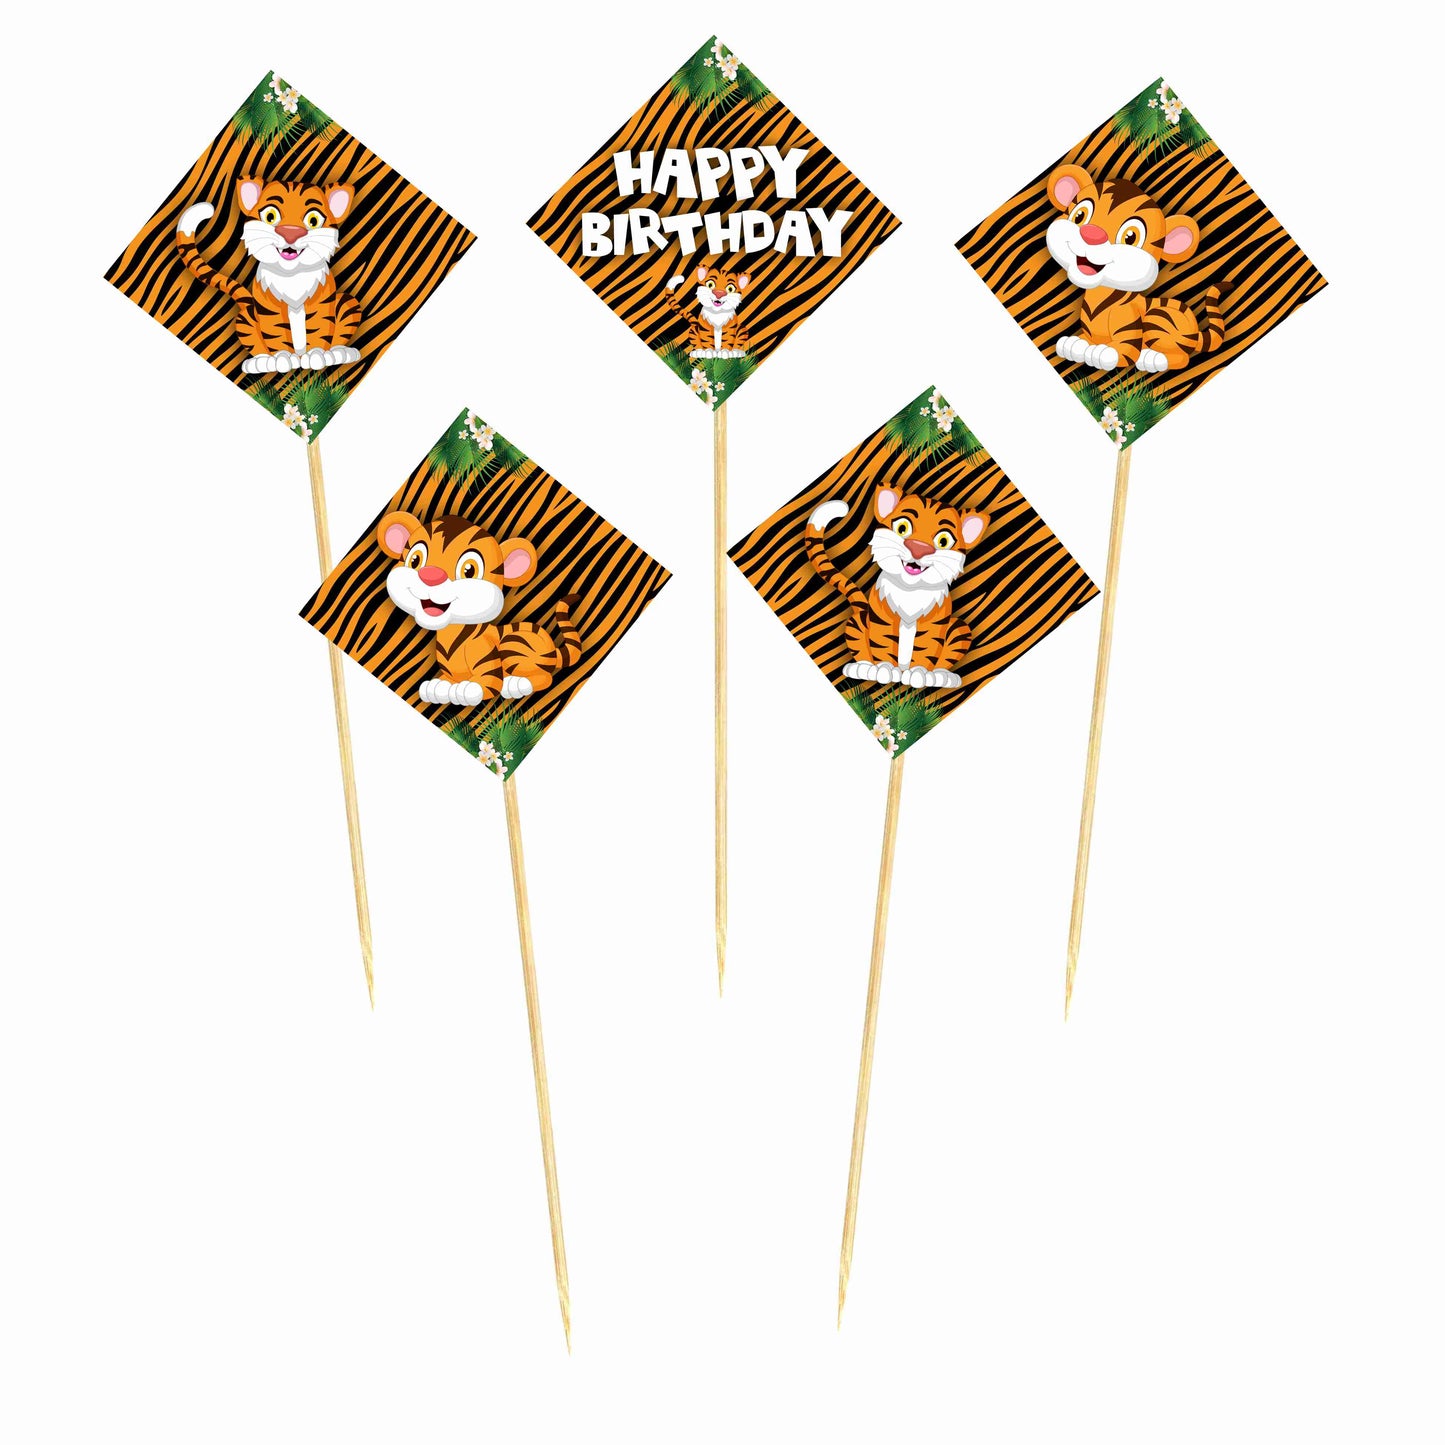 Tiger Theme Cake Topper Pack of 10 Nos for Birthday Cake Decoration Theme Party Item For Boys Girls Adults Birthday Theme Decor